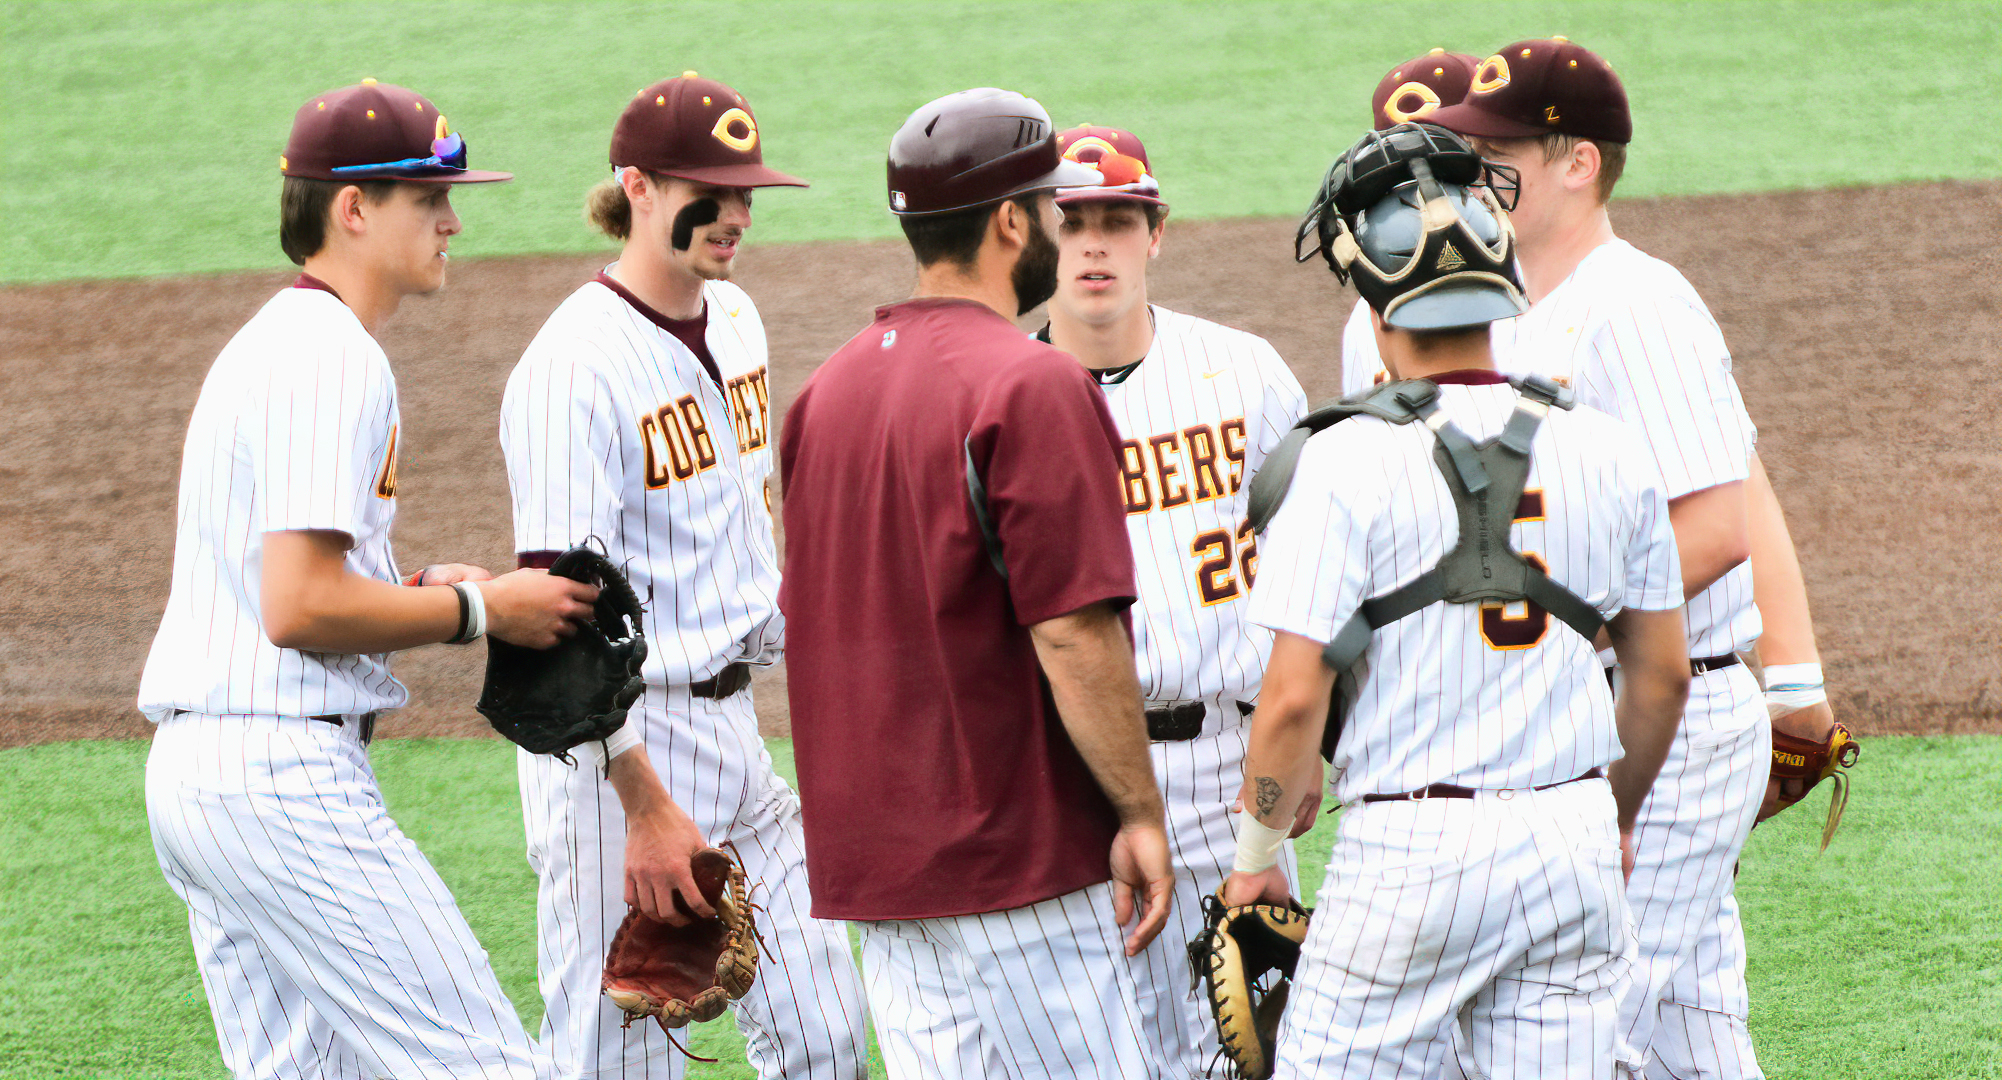 Concordia lost a pair of games to John Carroll (Ohio) in the penultimate doubleheader on its annual spring training trip to Florida.